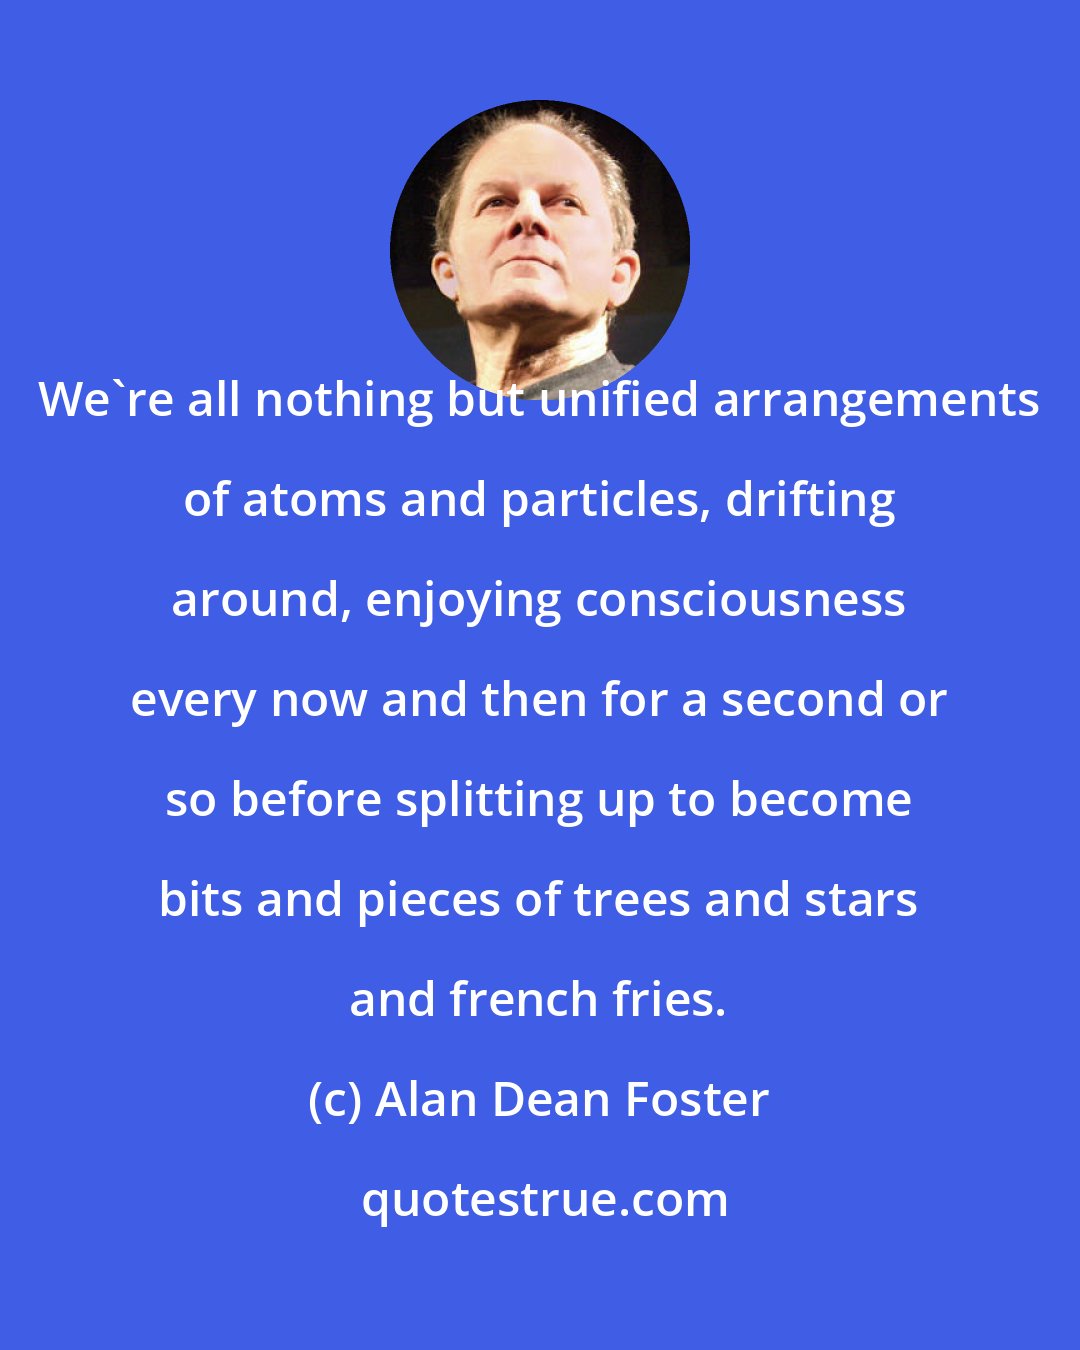 Alan Dean Foster: We're all nothing but unified arrangements of atoms and particles, drifting around, enjoying consciousness every now and then for a second or so before splitting up to become bits and pieces of trees and stars and french fries.